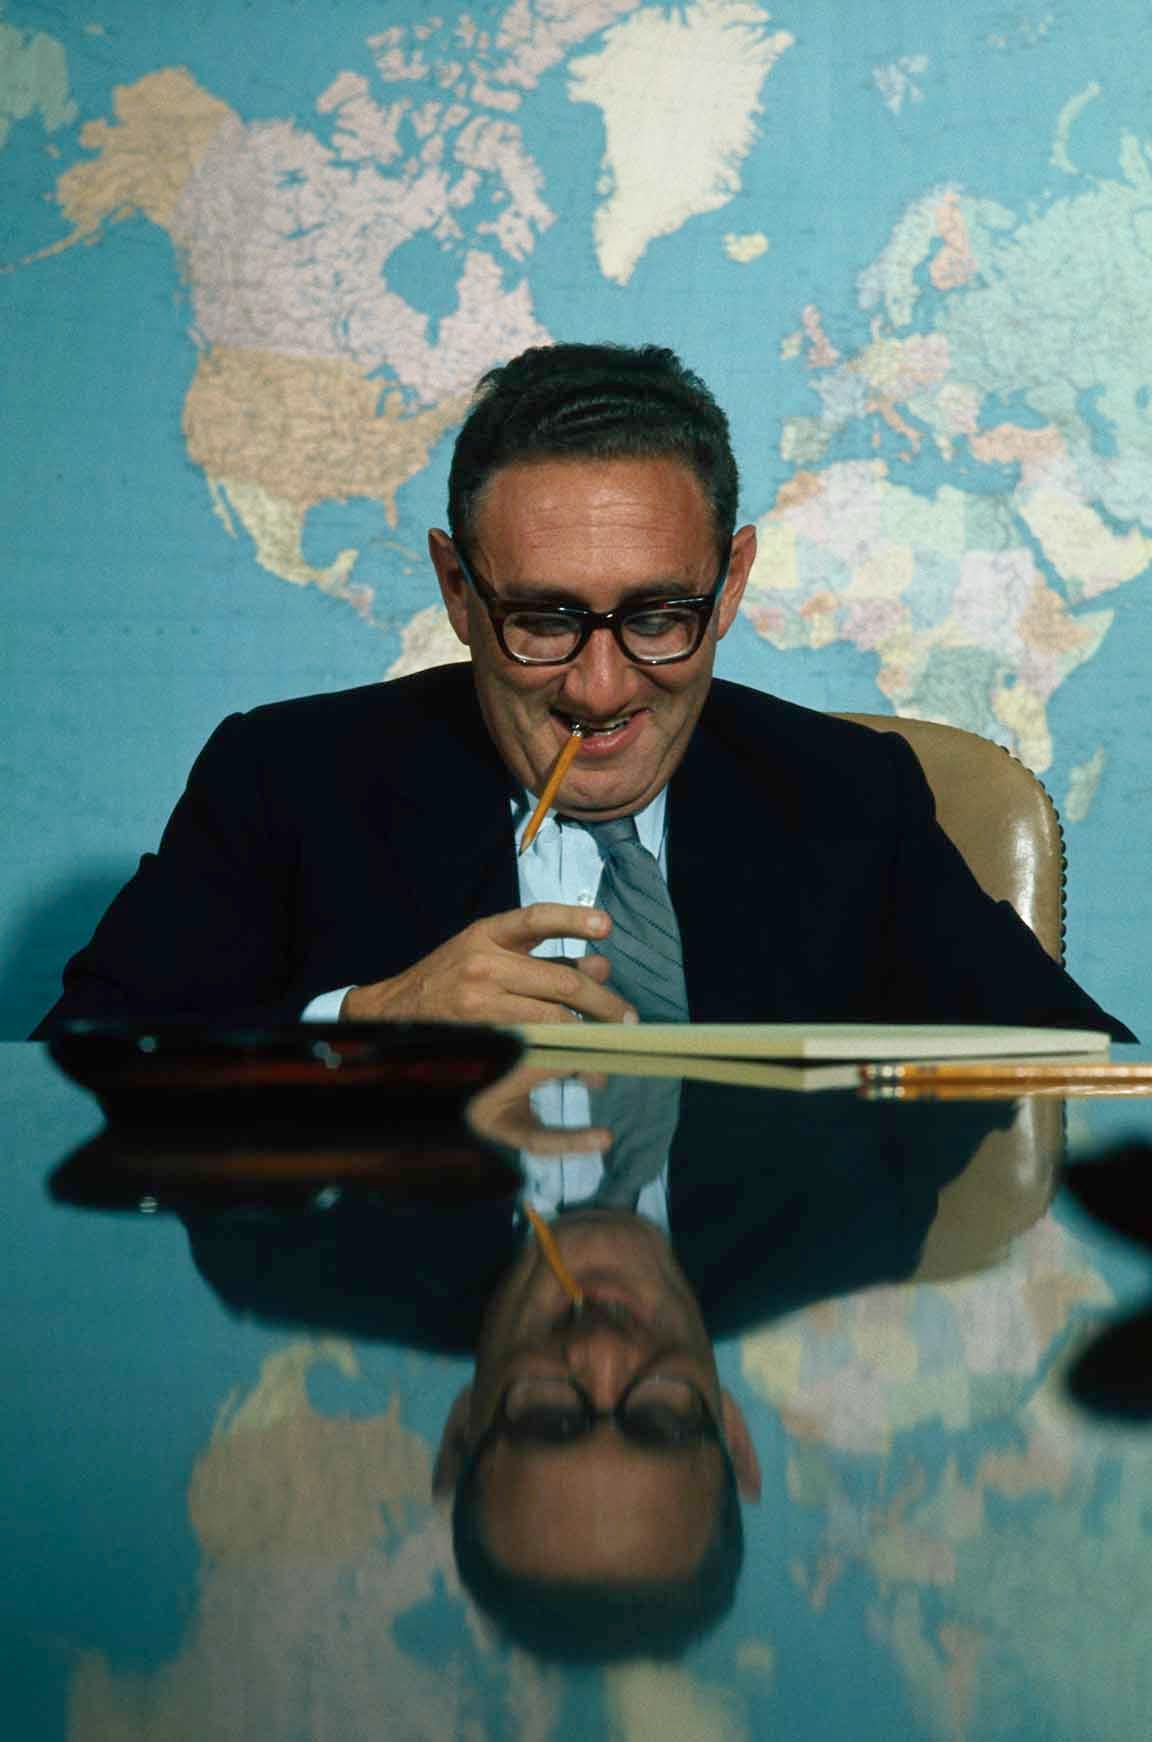 Henry Kissinger circa 1969 sitting at a table with a map of the world behind him. He is looking down, smiling,  with a pencil dangling out of his mouth, and the table reflects his image. White House National Security Affairs Adviser Henry Kissinger poses for a portrait in the Situation Room in the basement of the West Wing at the White House in Washington, D.C. (Photo by © Wally McNamee/CORBIS/Corbis via Getty Images)